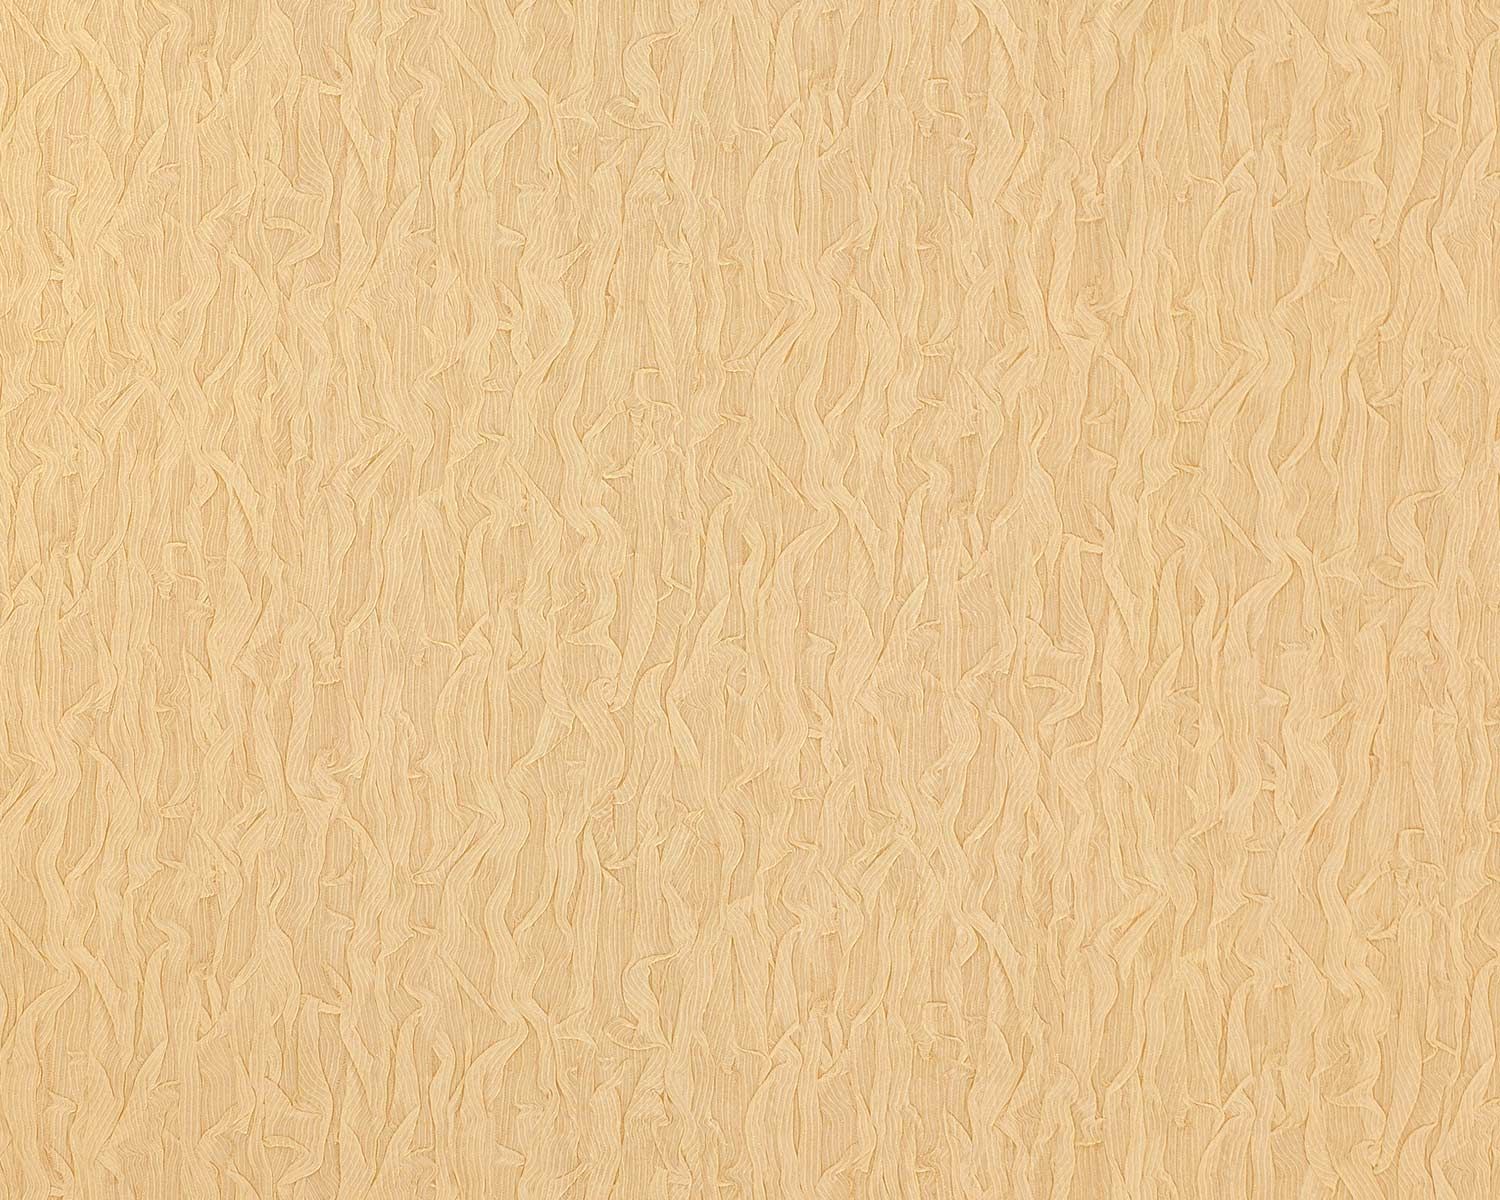  32 luxury non woven wallpaper fabric look safron yellow gold 10,65 sqm